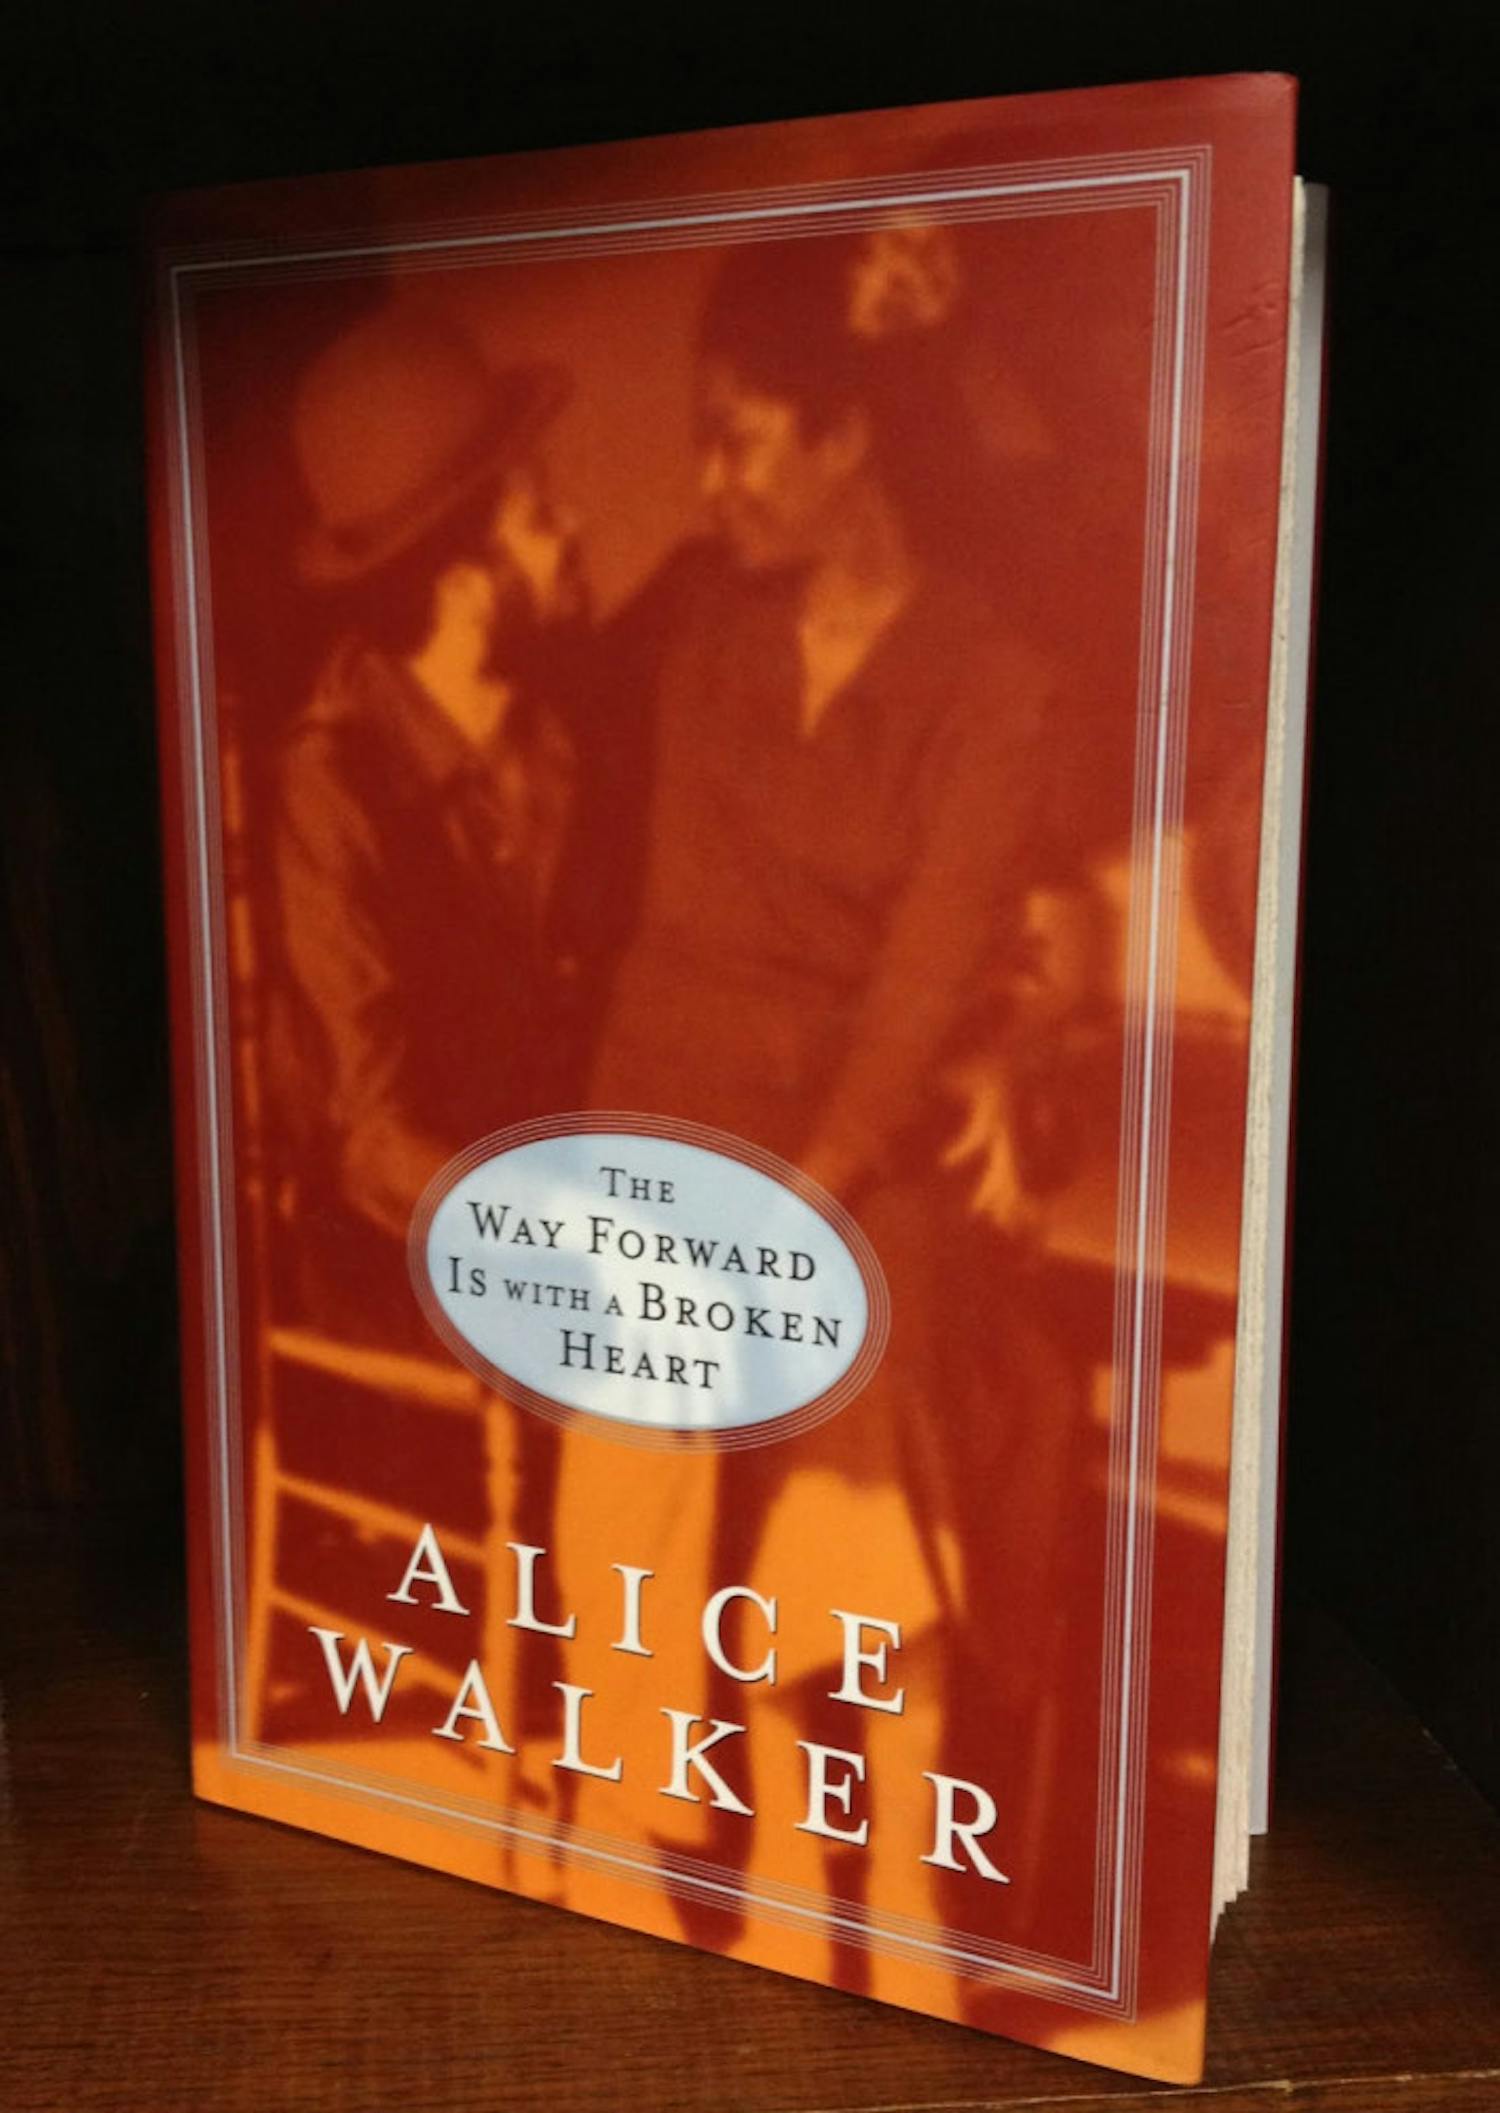 The Way Forward is with a Broken Heart, by Alice Walker
$3